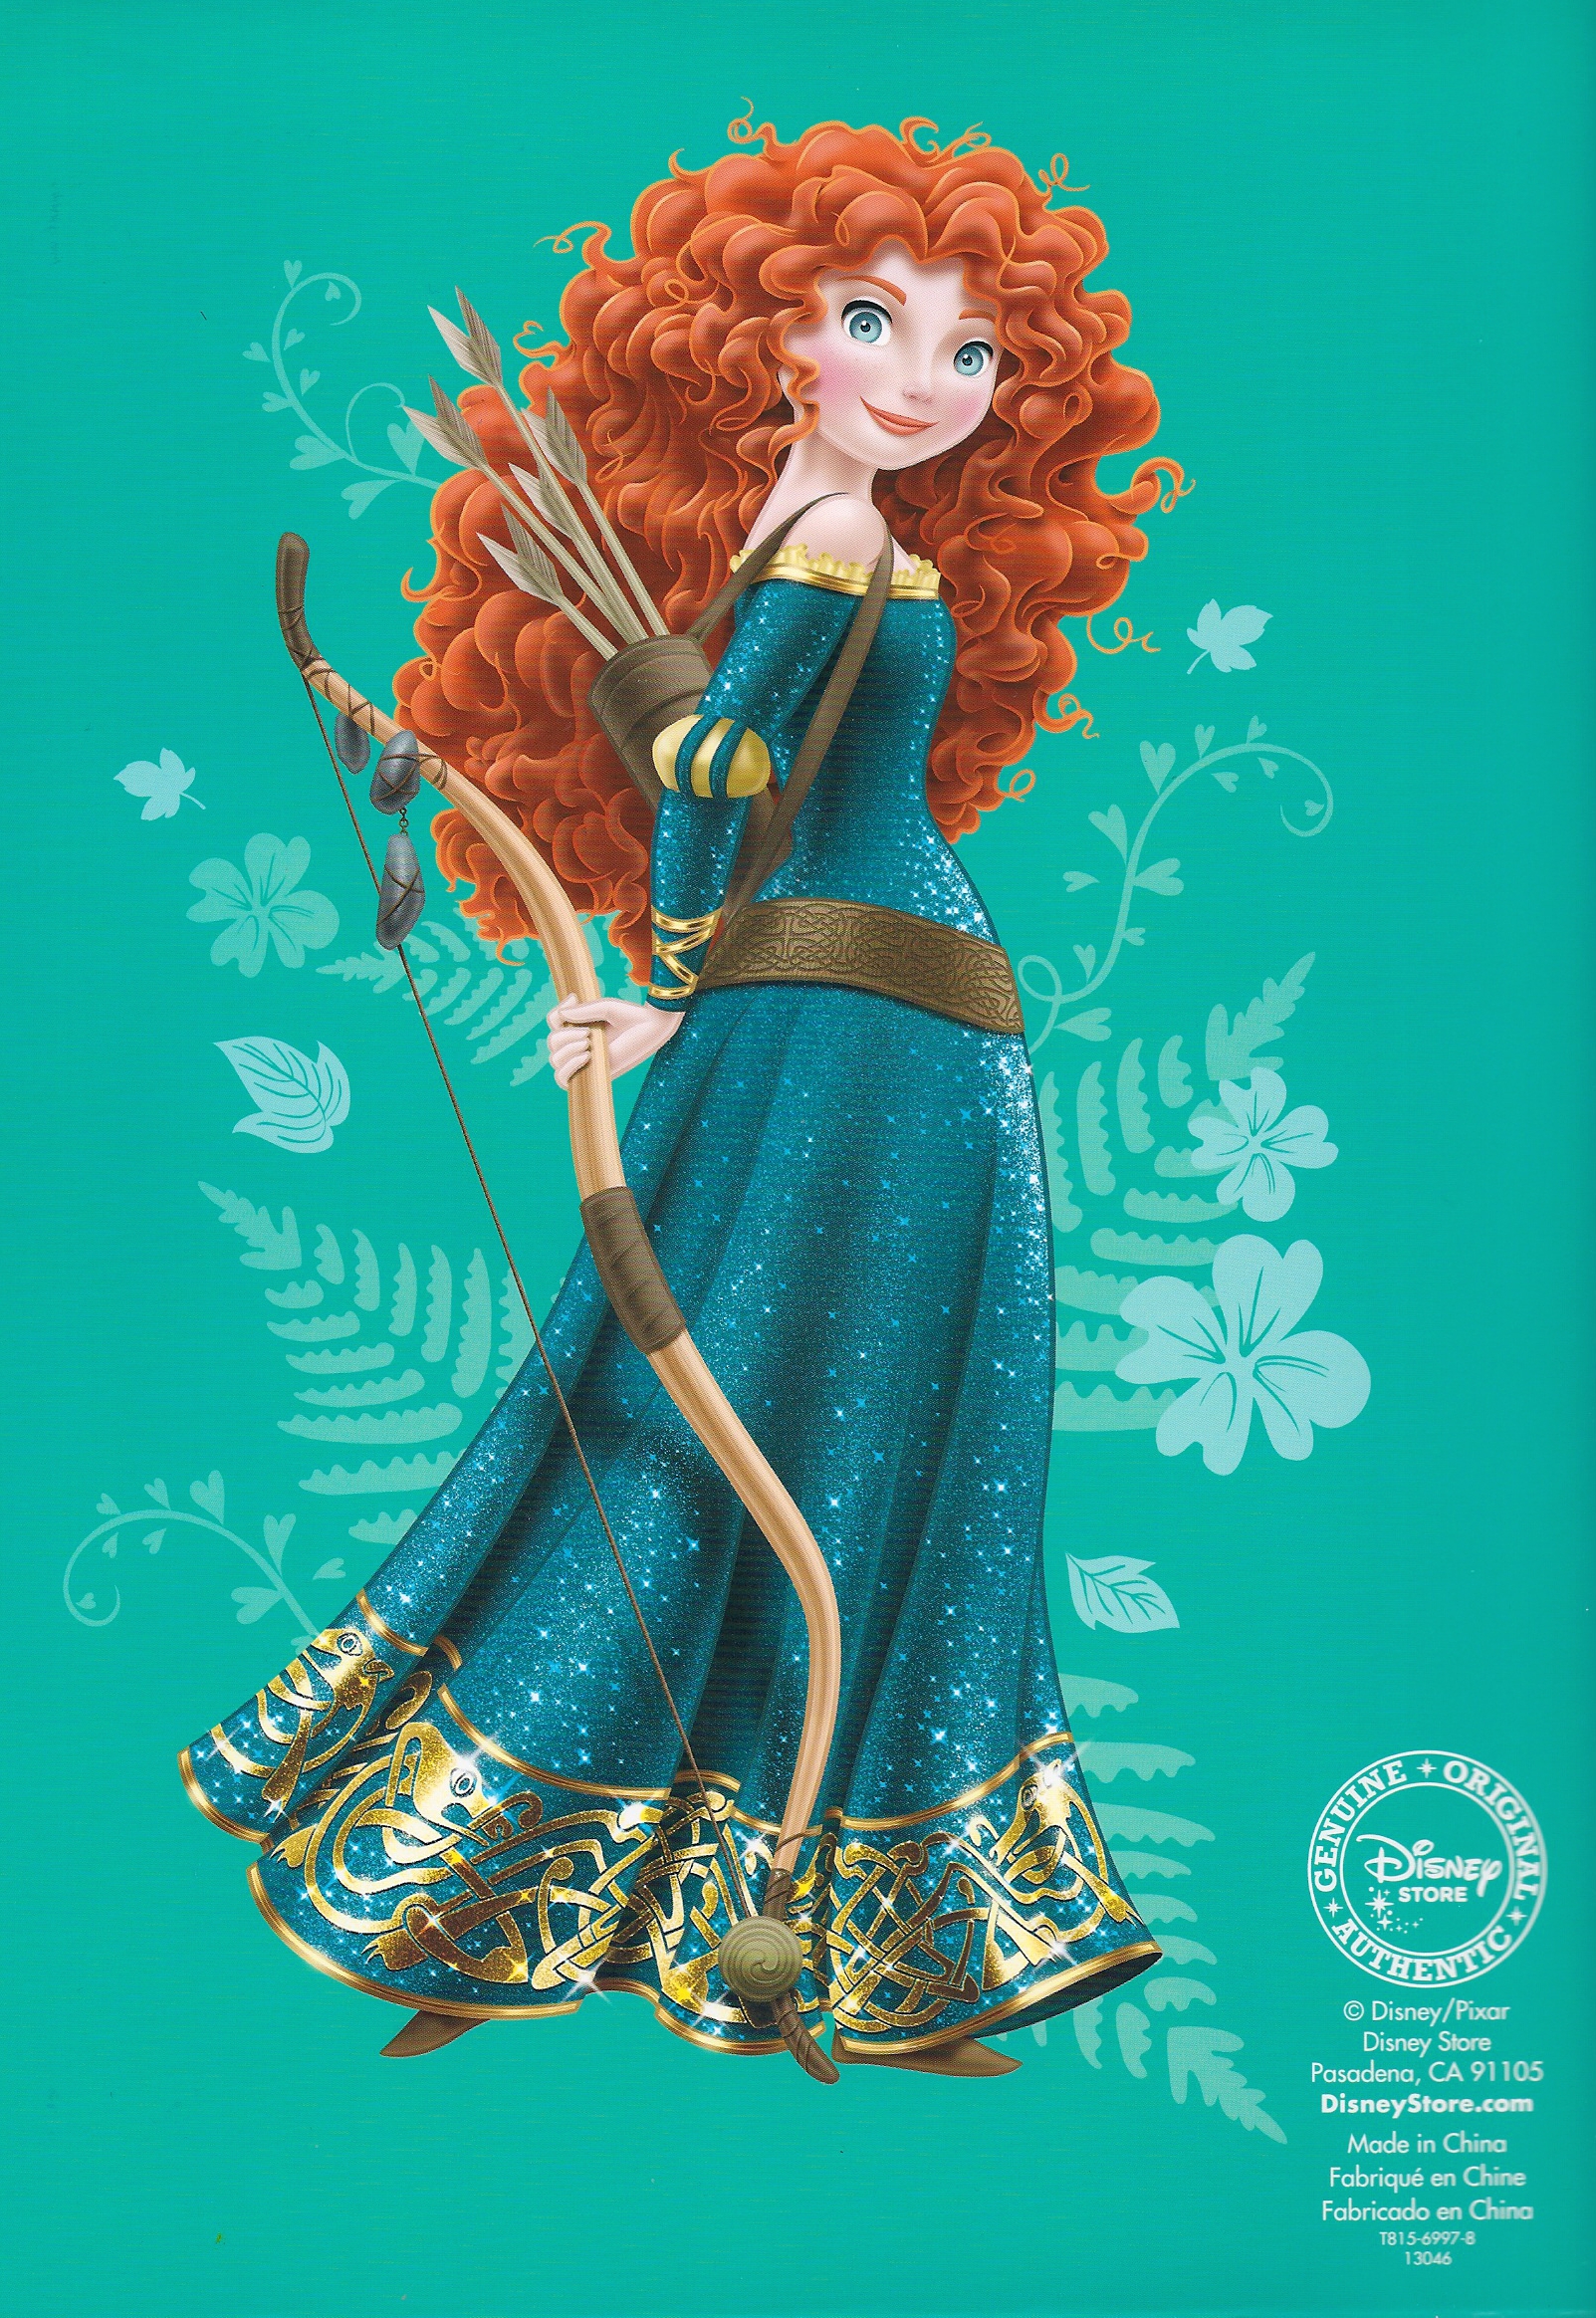 Picture Of Princess Merida Wallpapers